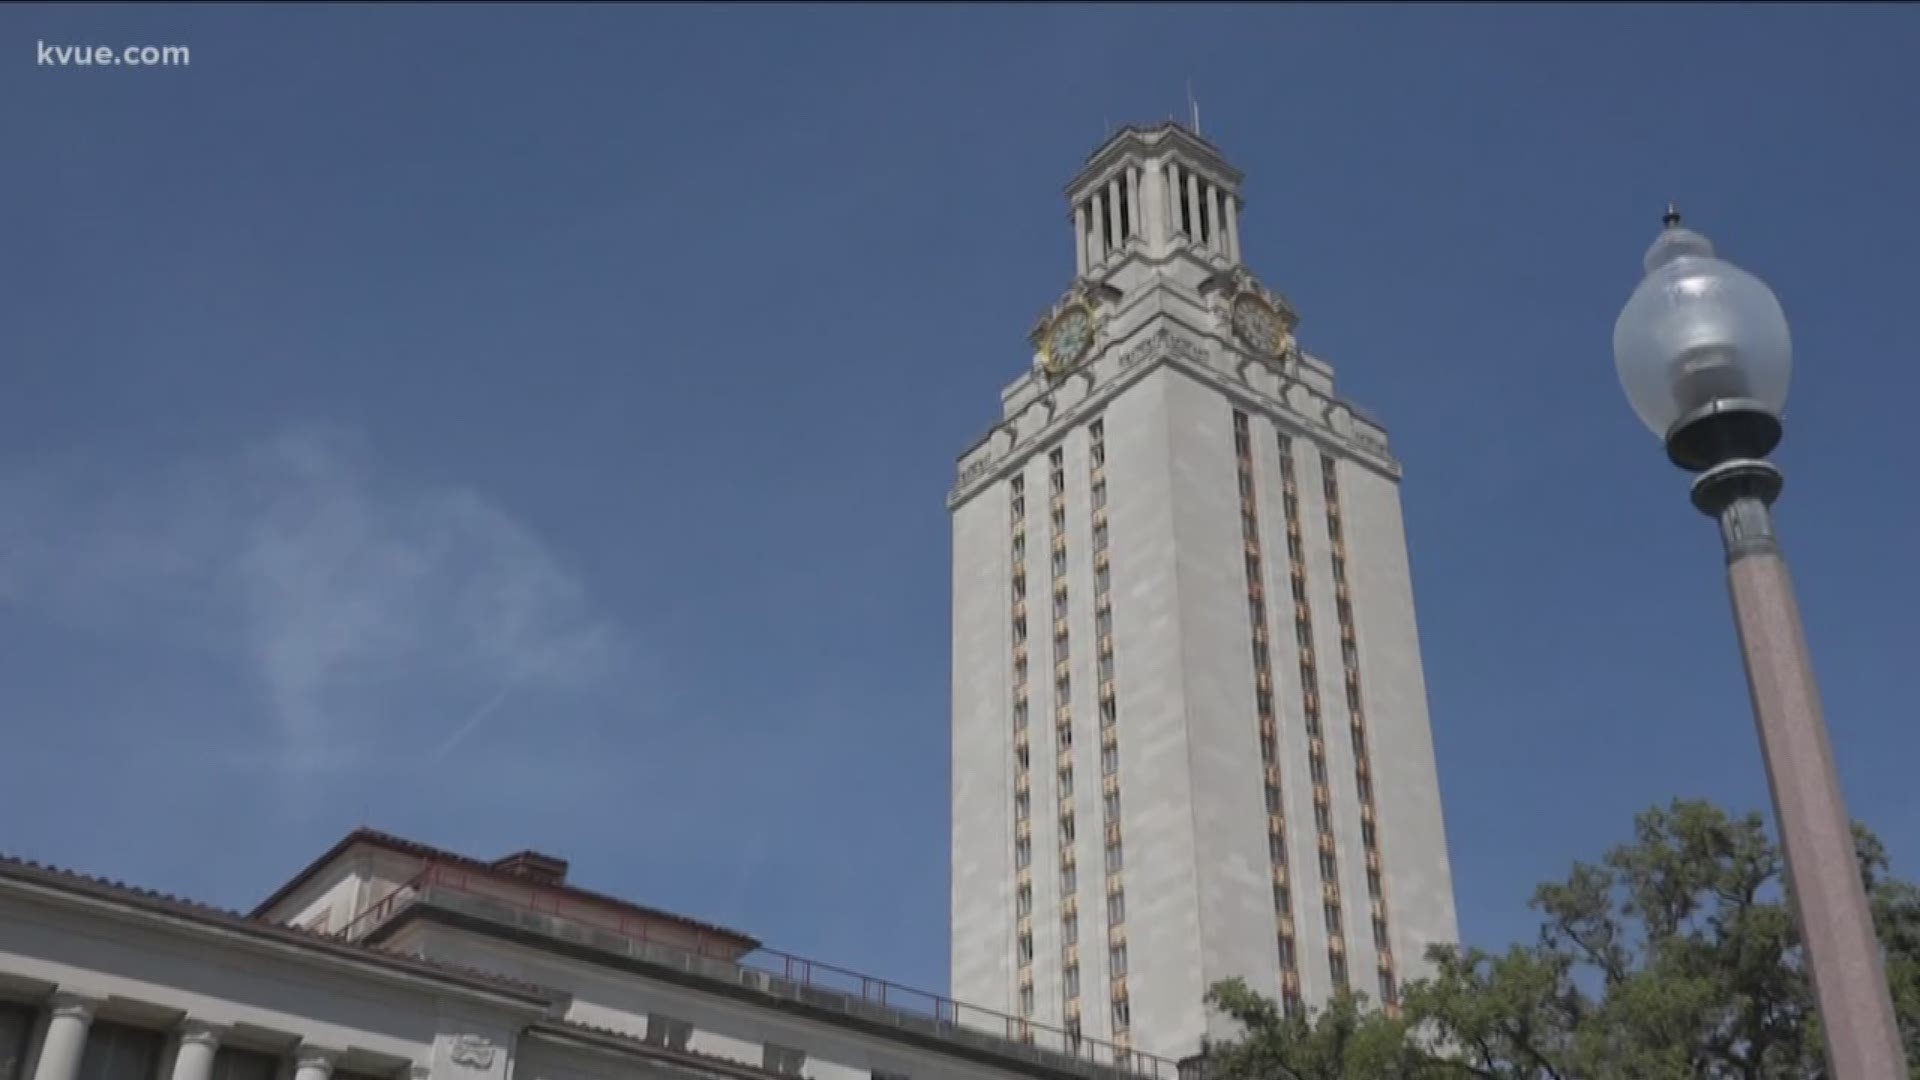 The University of Texas is monitoring the situation continuously and has decided to extend spring break due to coronavirus concerns.